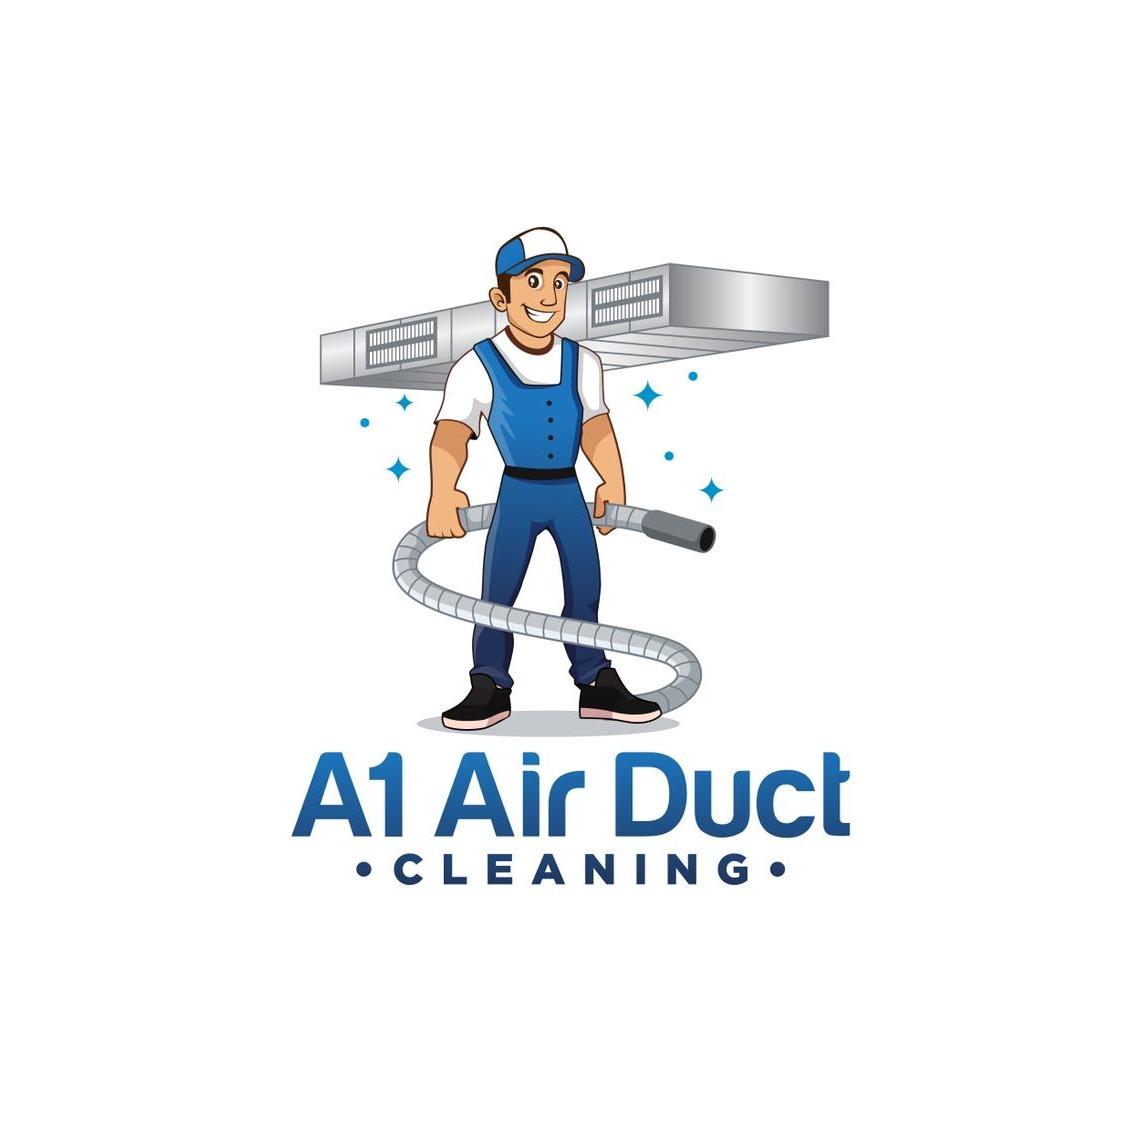 A1 Air Duct Cleaning - Pittsburgh, PA 15235 - (412)534-5669 | ShowMeLocal.com